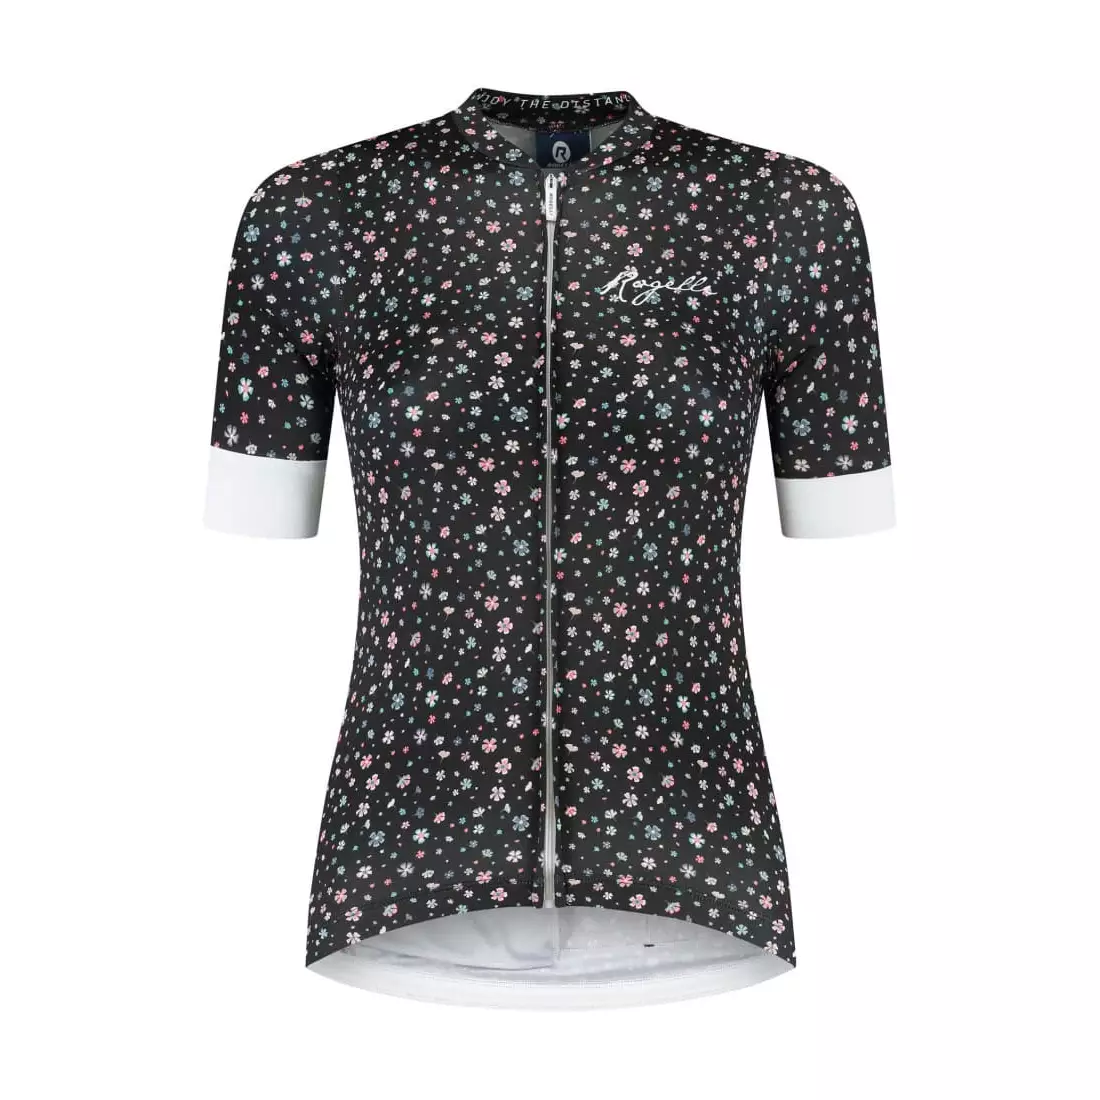 Rogelli LILY women's cycling jersey, black and white